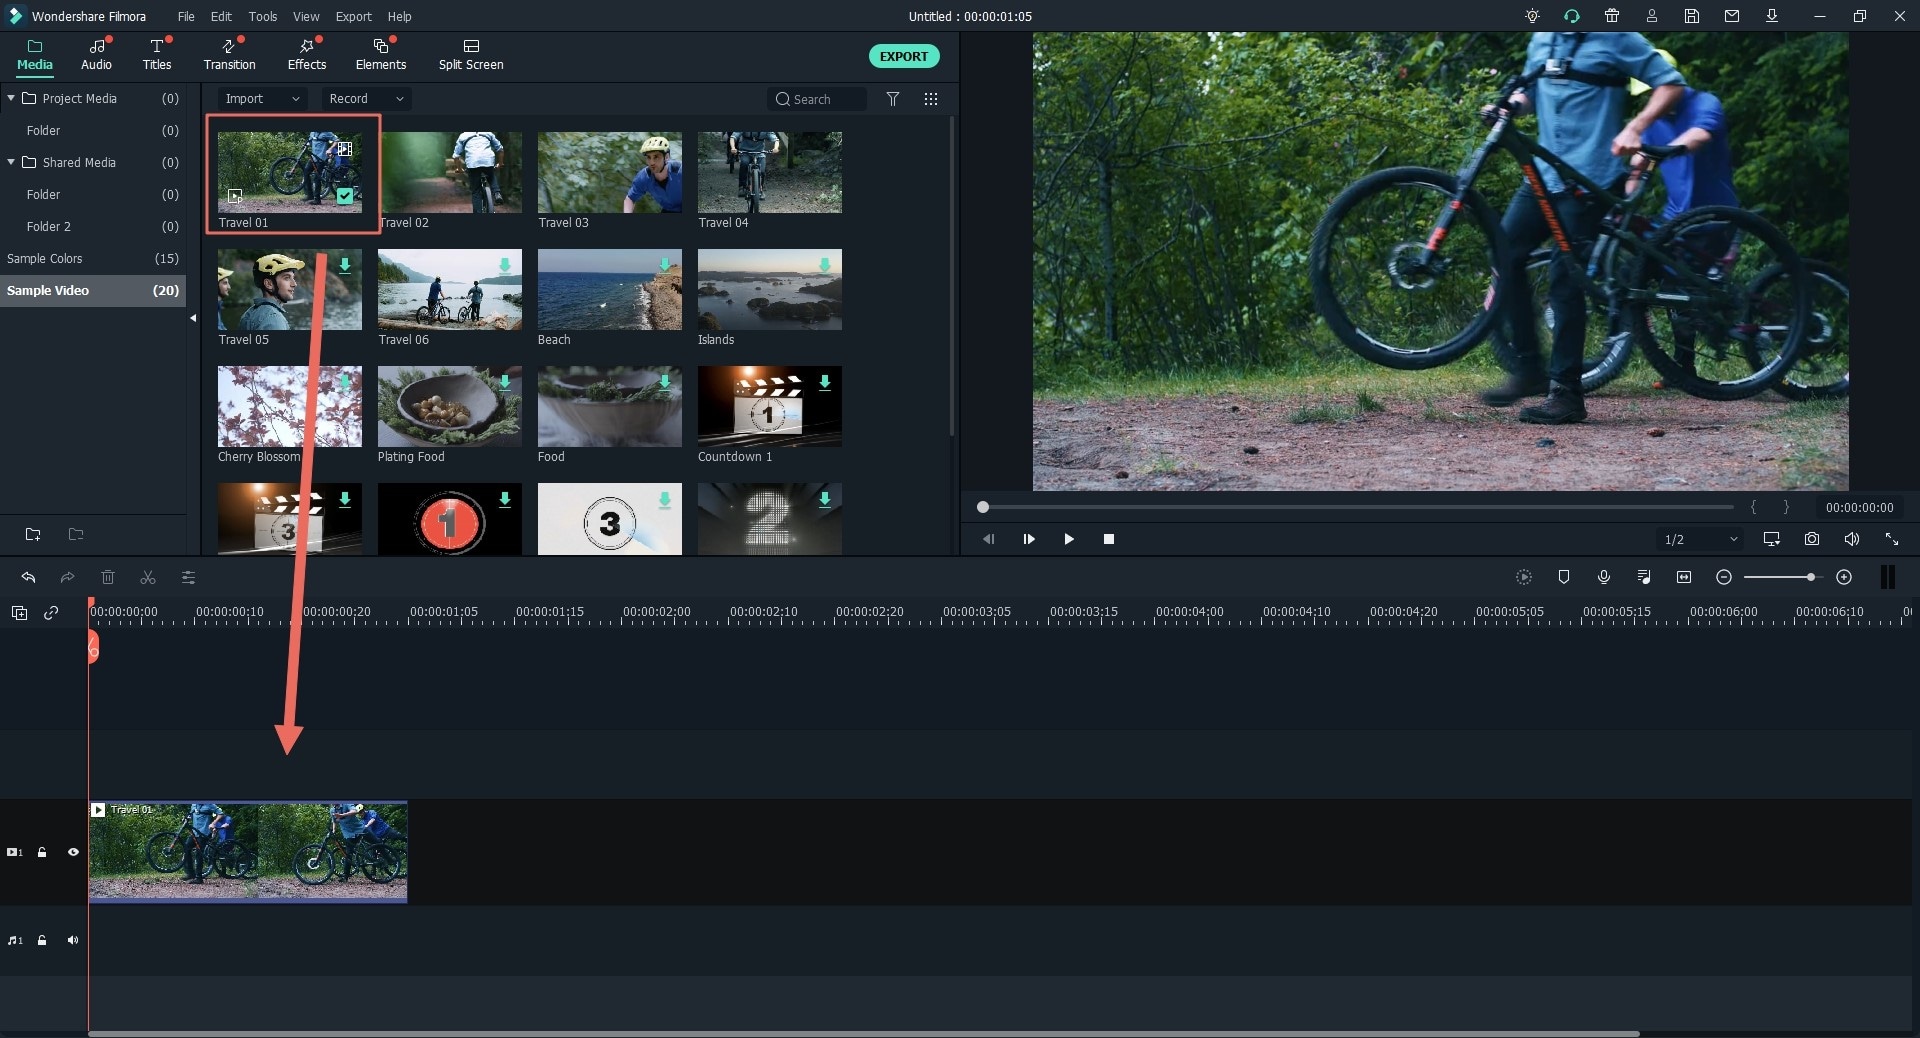 drag photos and video clips to timeline